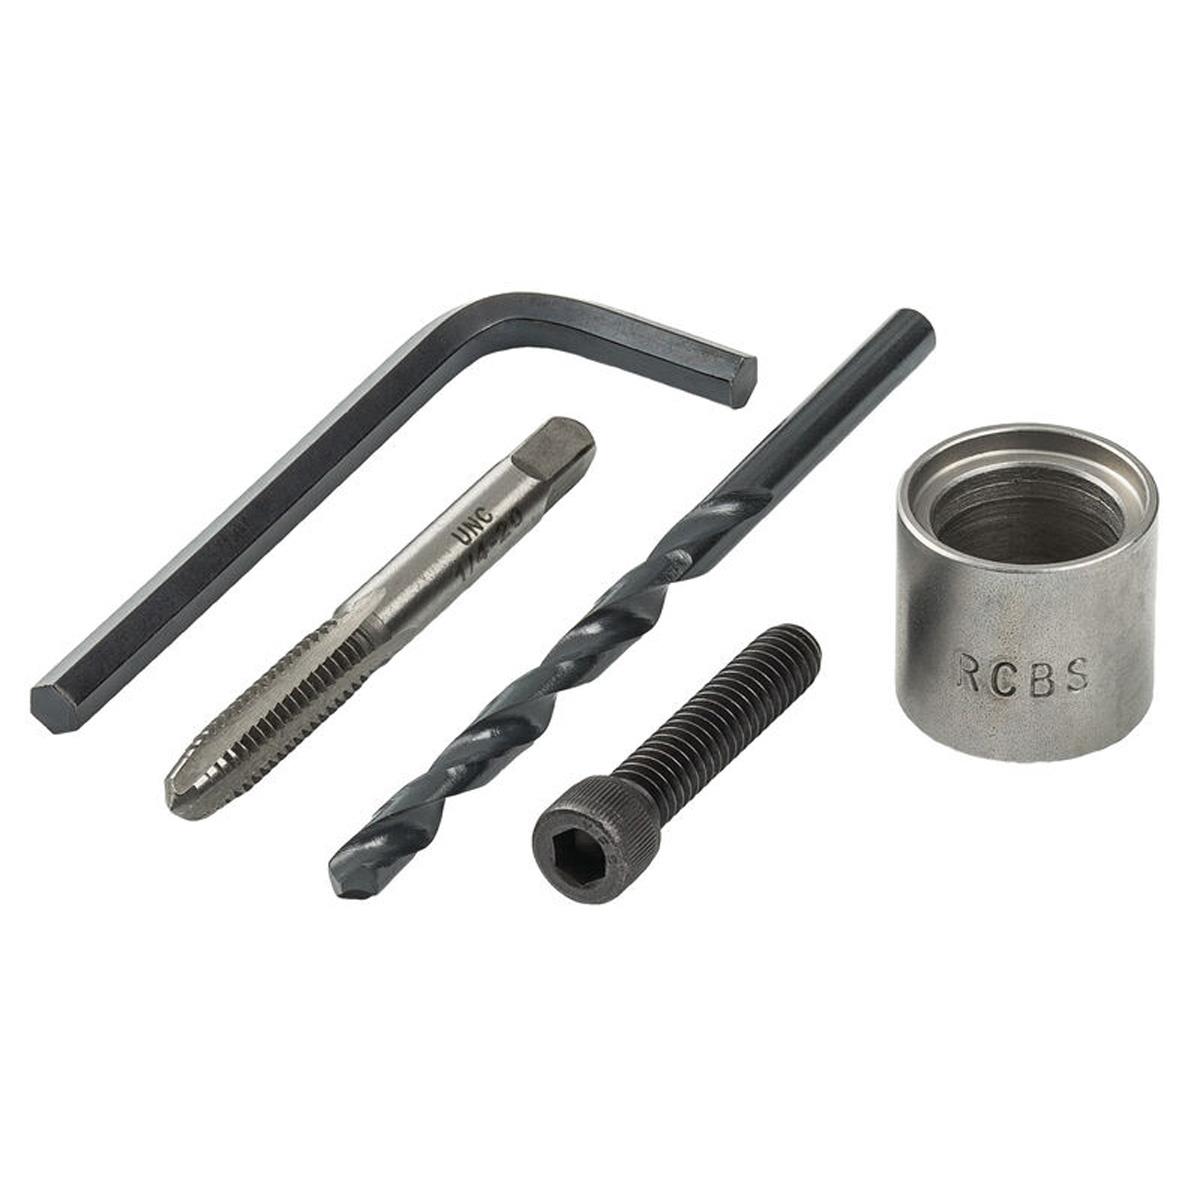 Image of RCBS Stuck Case Remover Kit